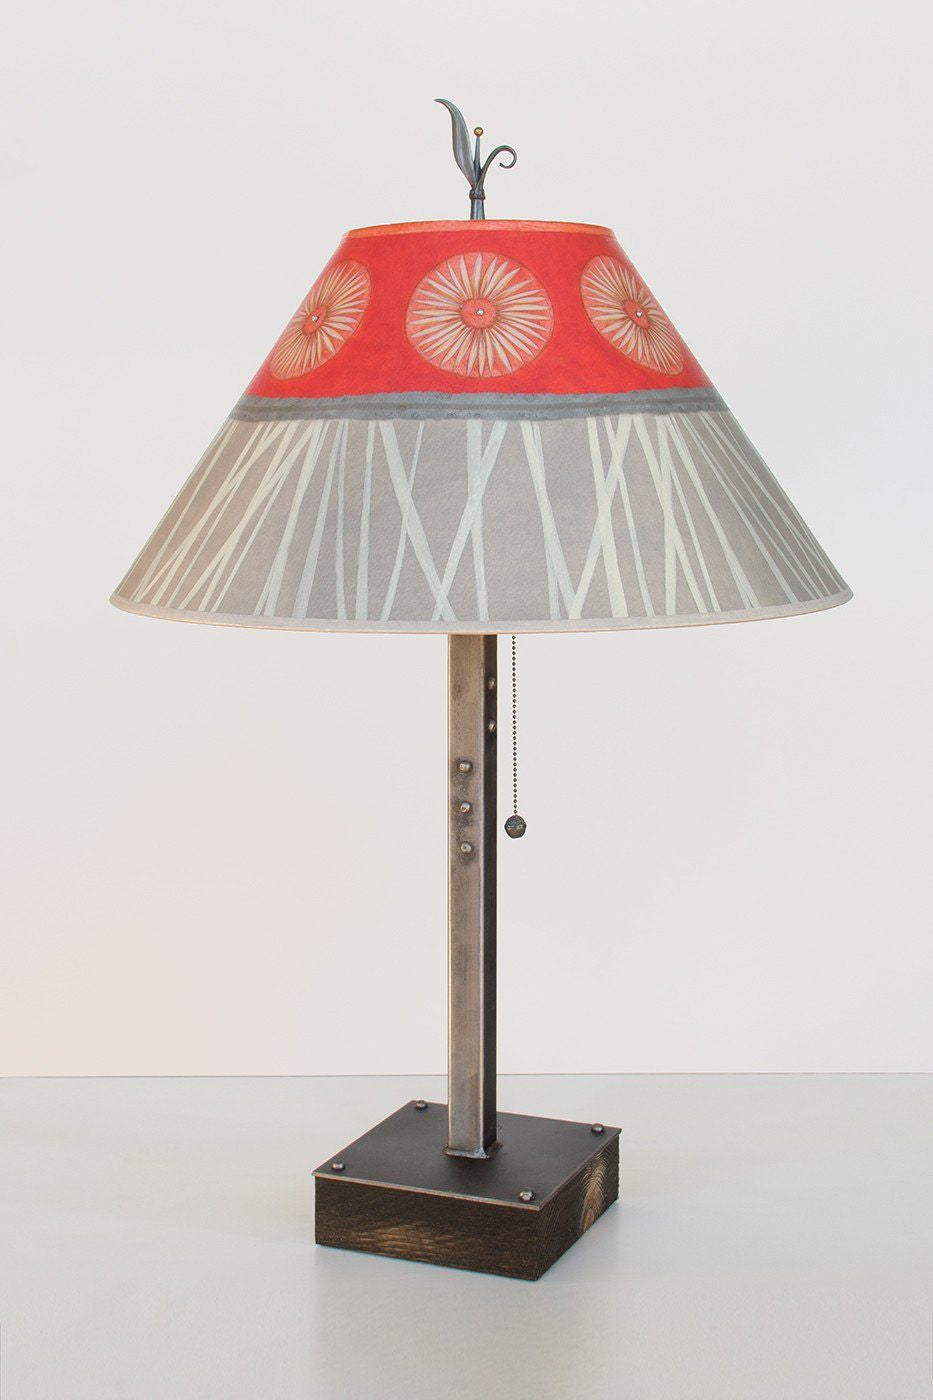 Steel Table Lamp on Wood with Large Conical Shade in Tang